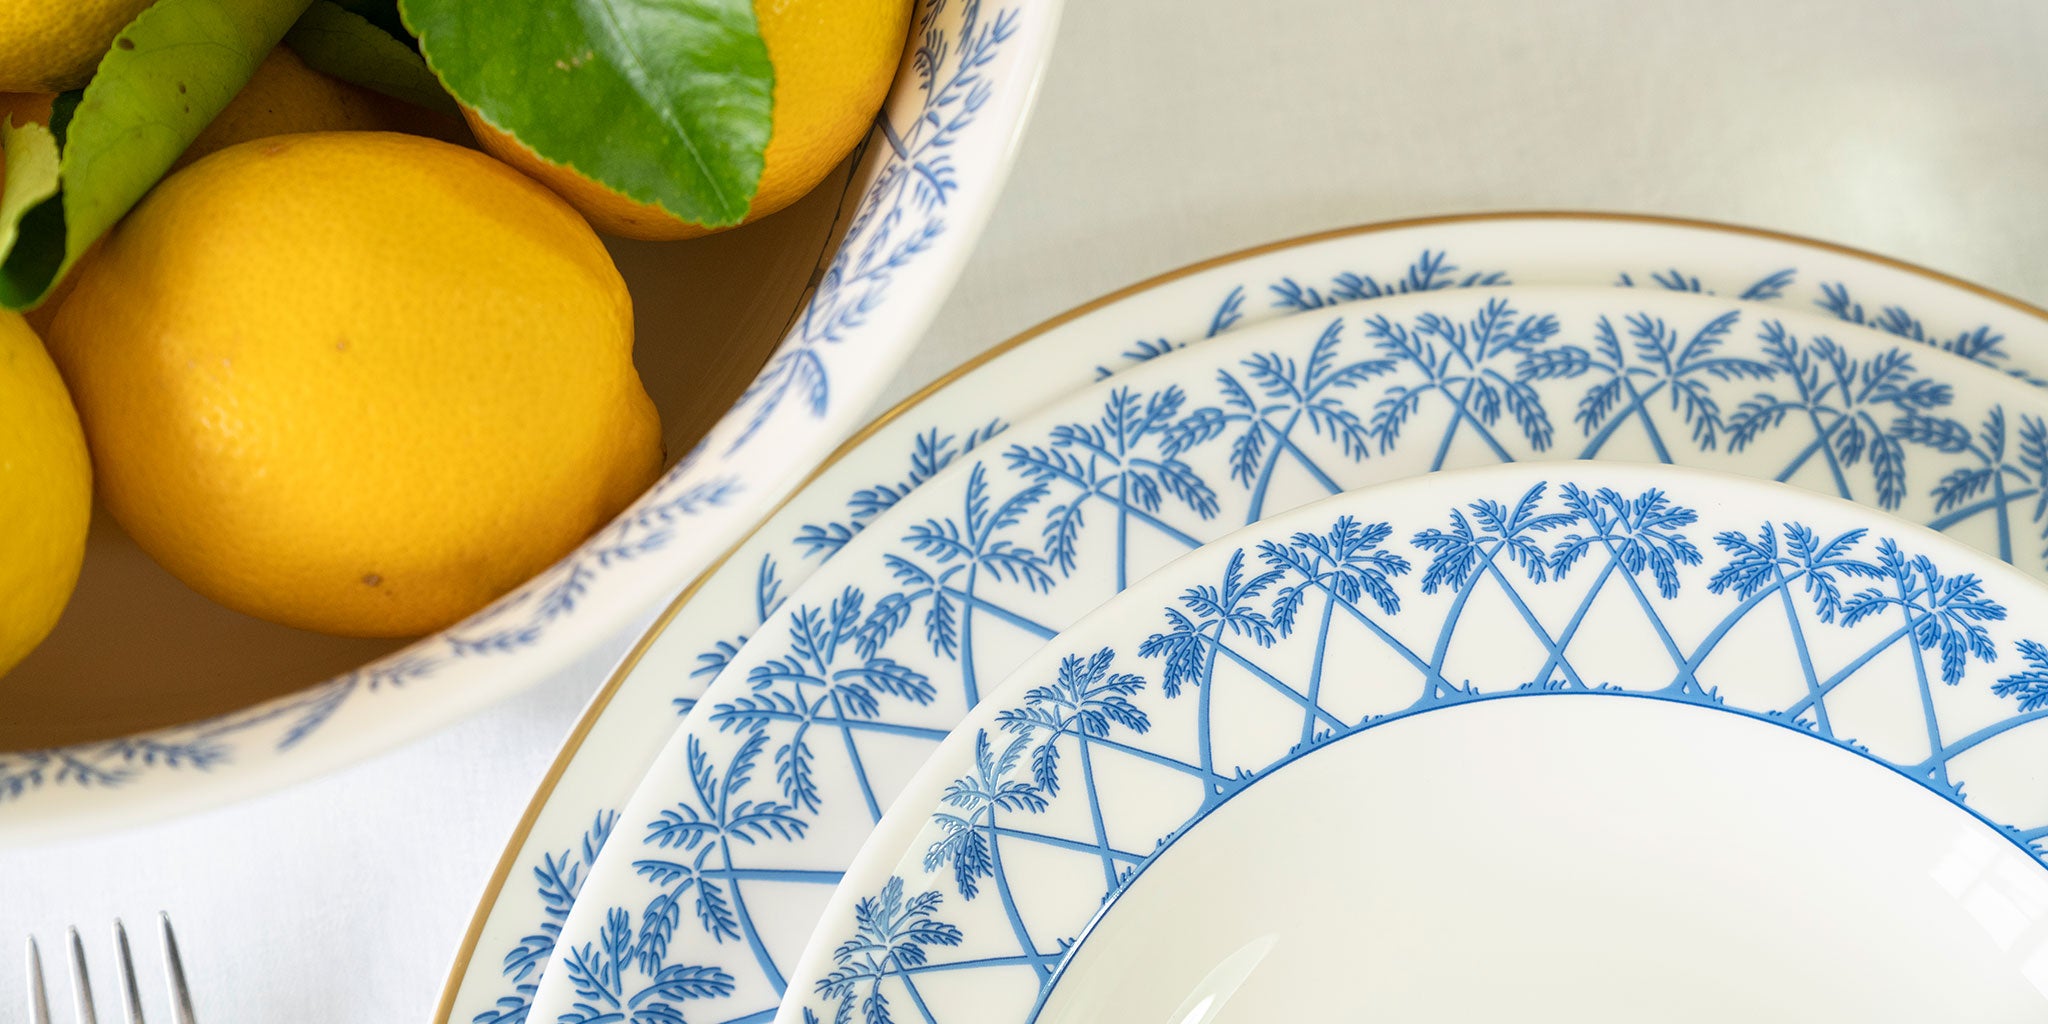 Beautiful homeware designed by Lotty B including fine bone china dinner service sets and pure linen tablecloths & napkin sets